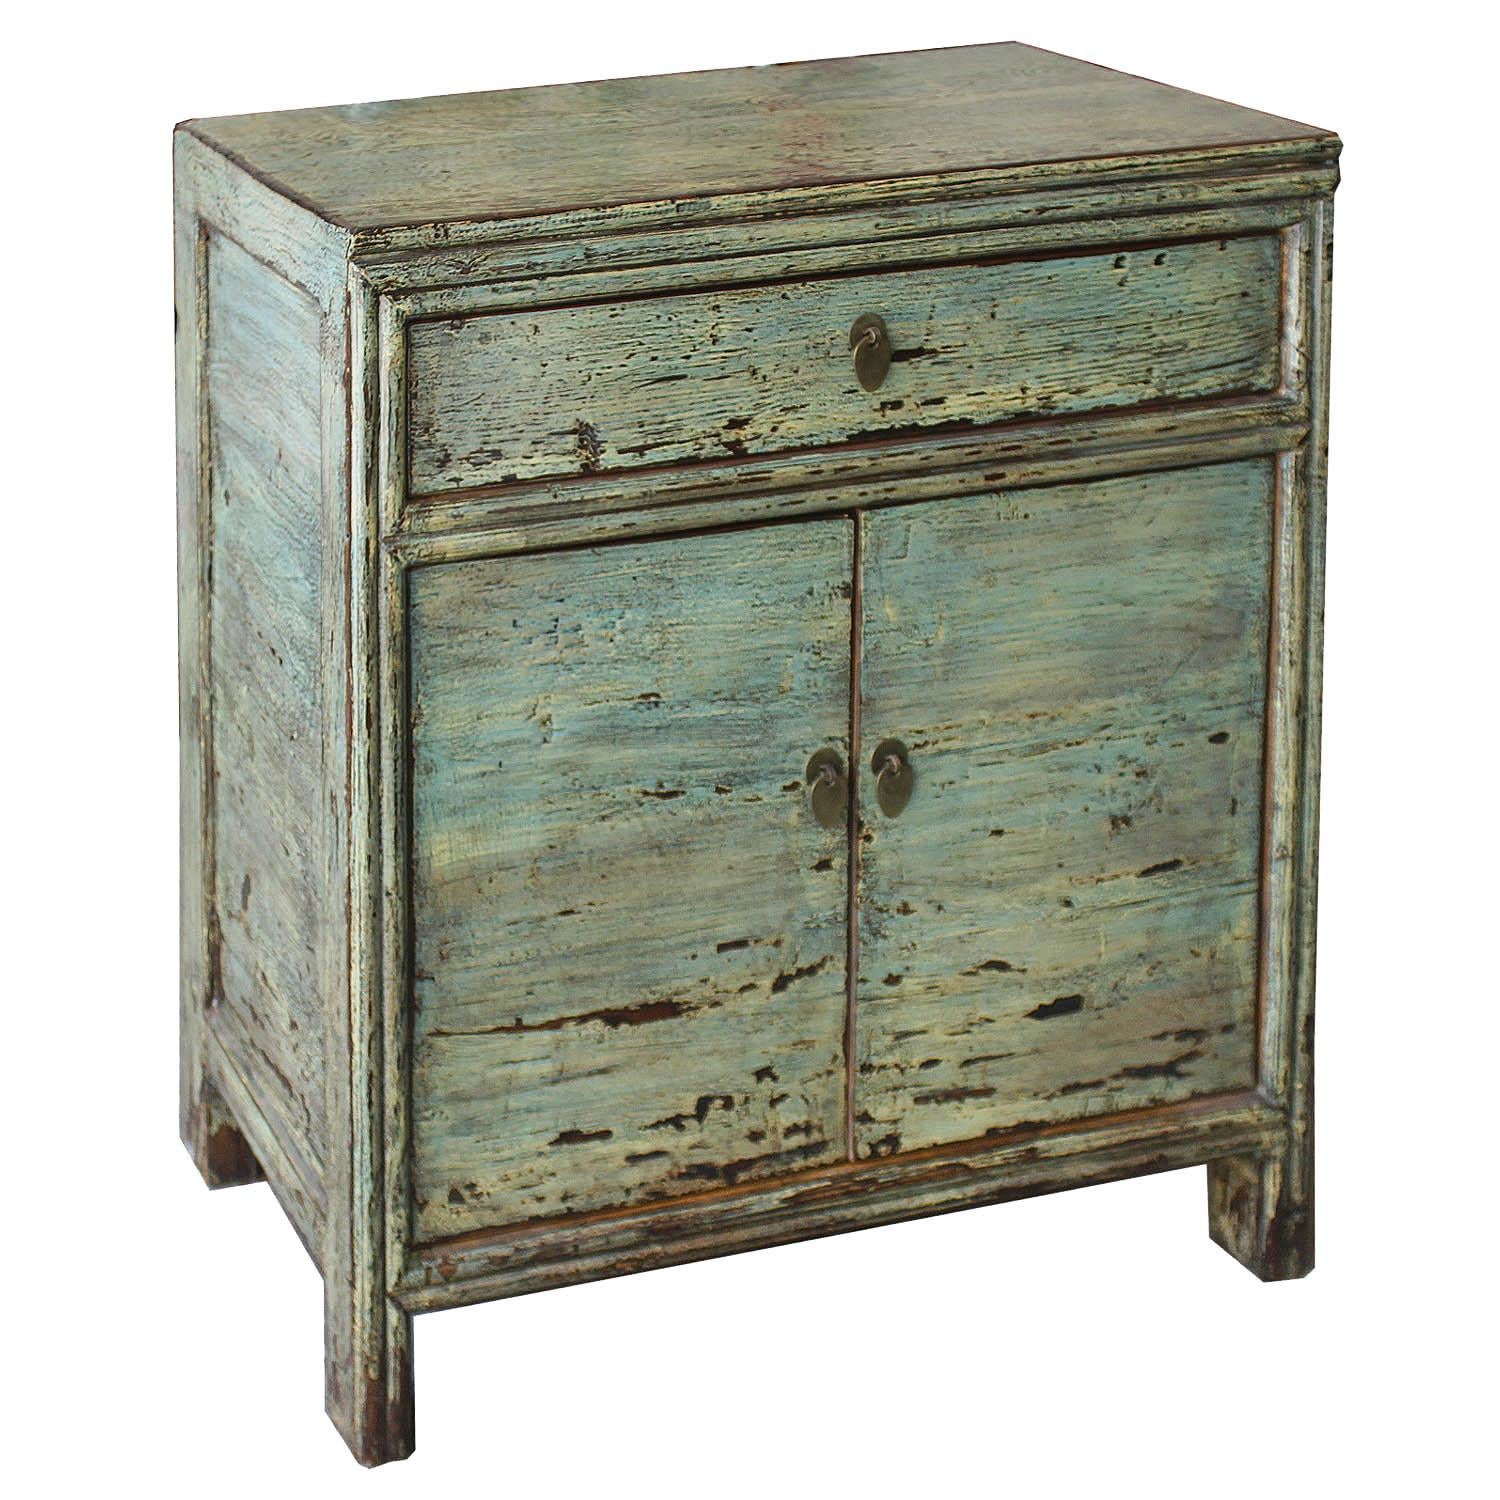 Contemporary green/blue side chests will make an amazing statement as a bedside table.